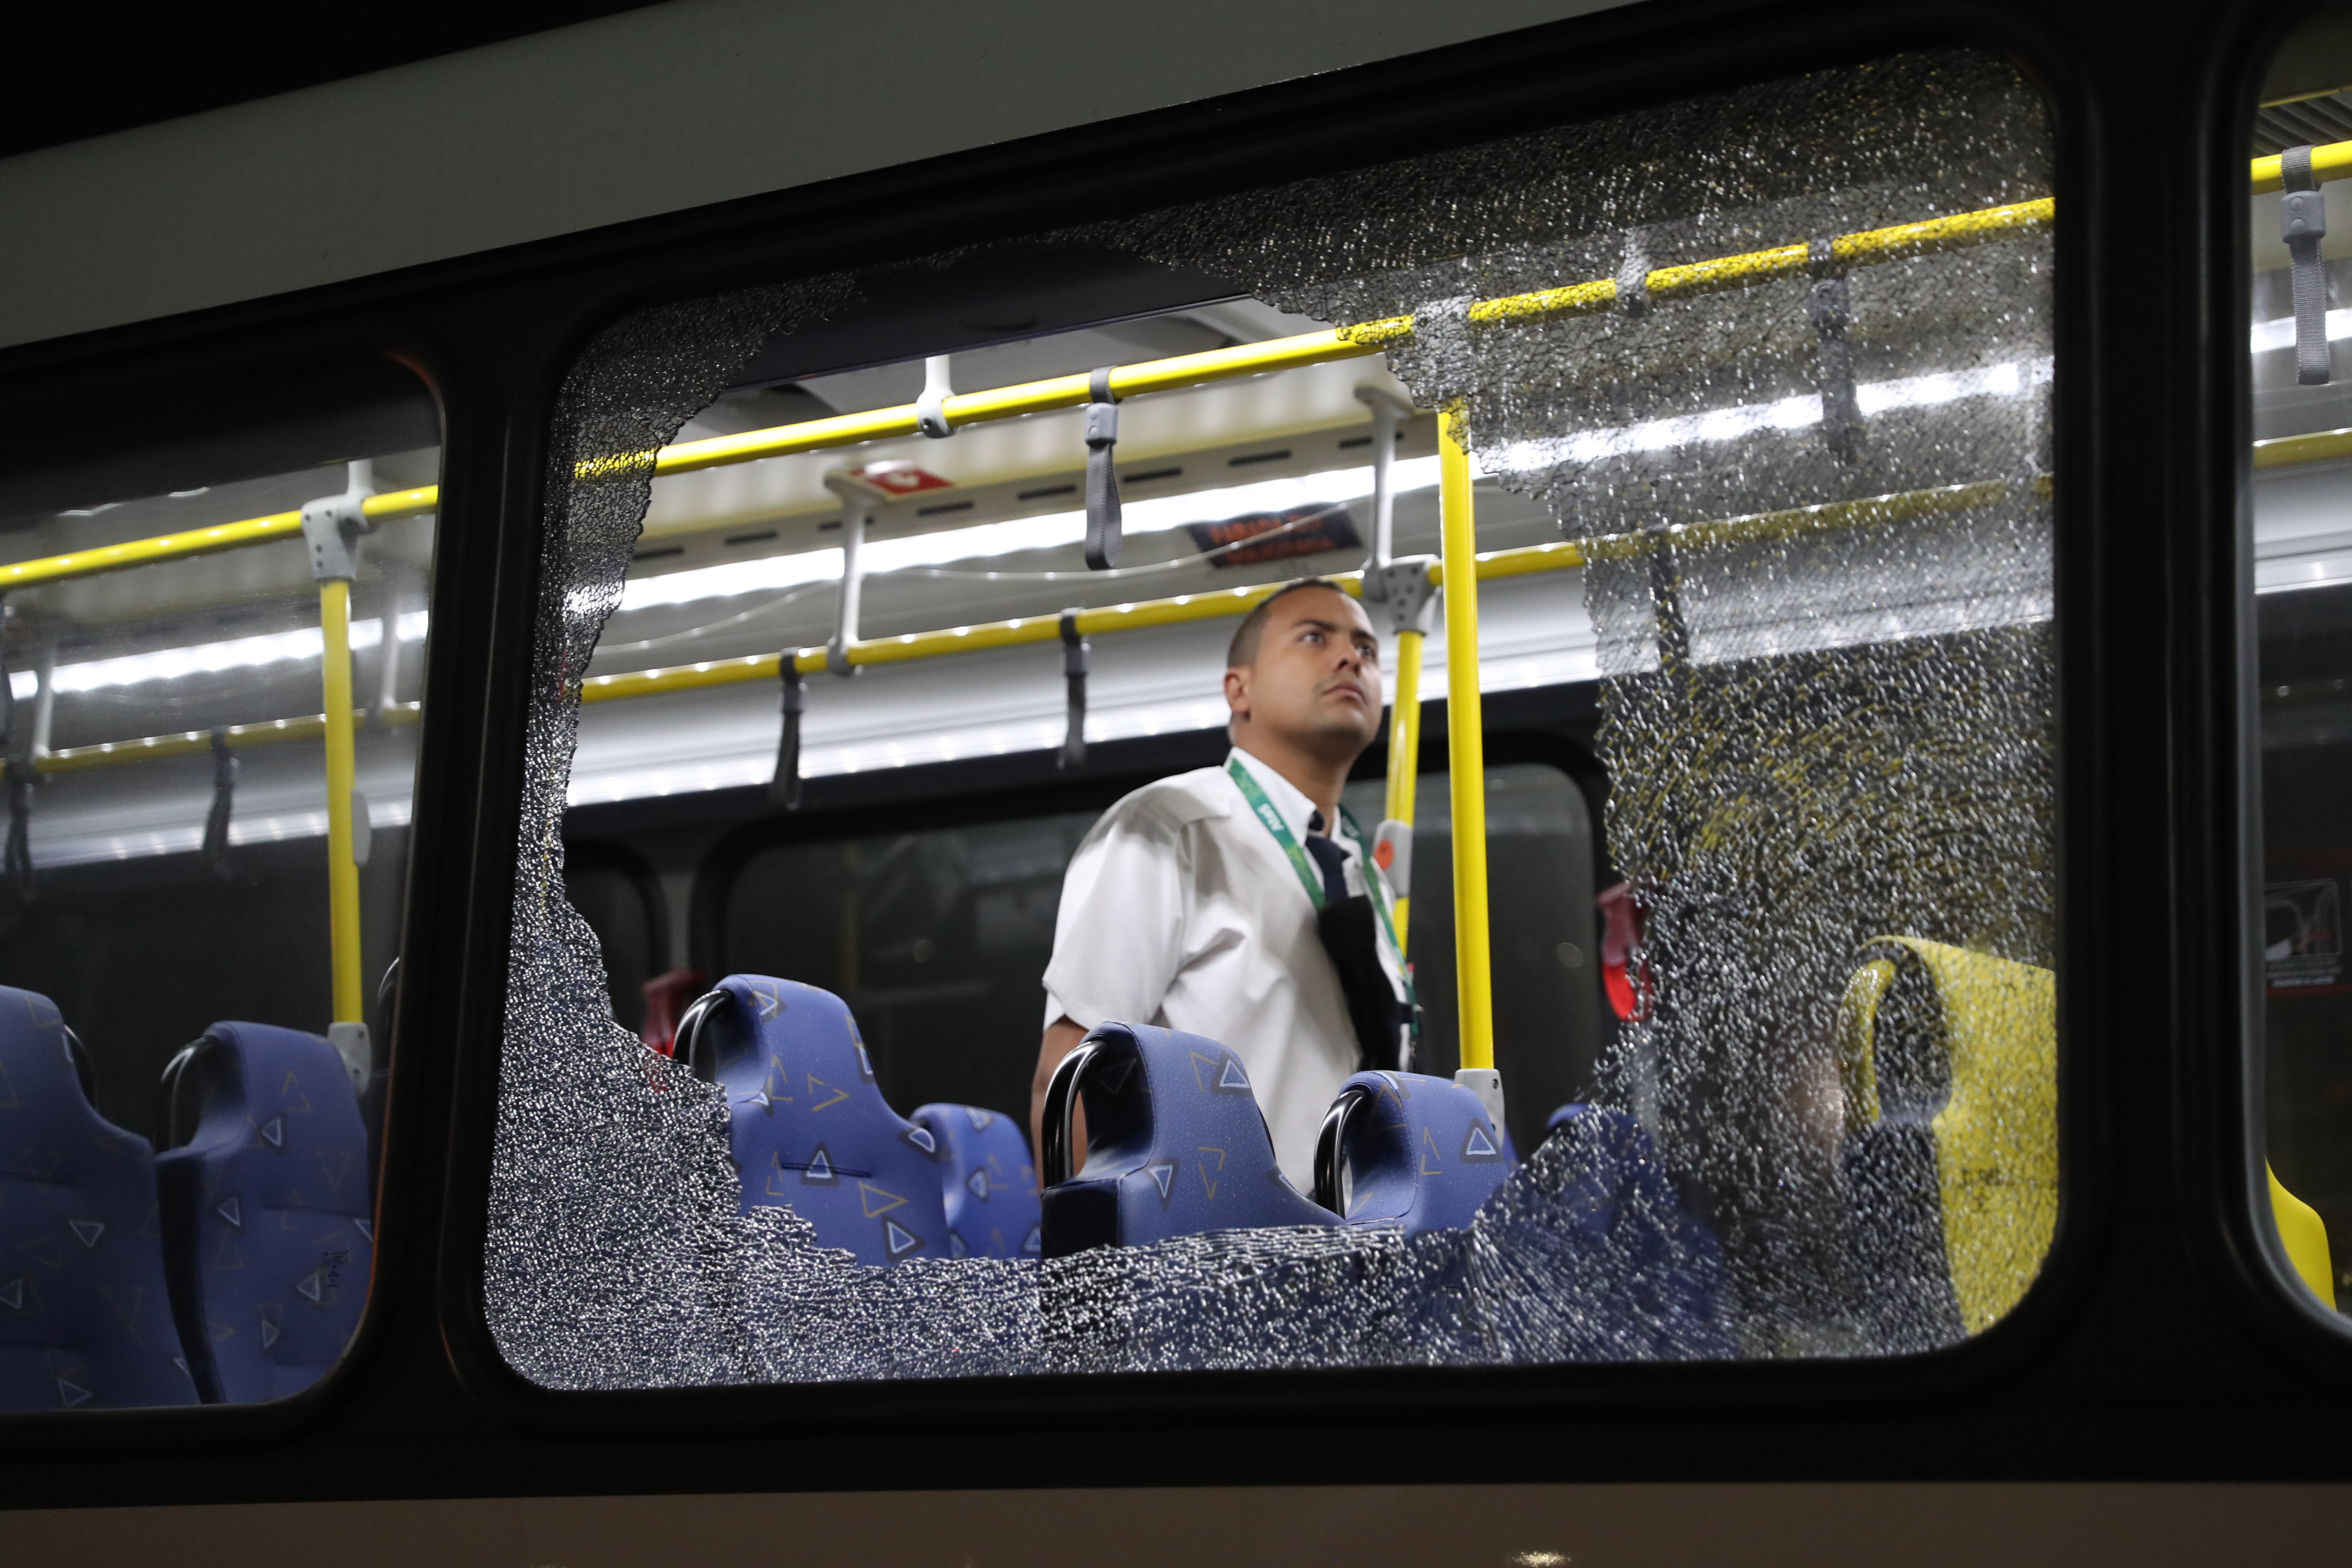 The damages to the windows of an Olympic journalists bus hit while driving on the transolympica highway are inspected by an official in Rio de Janeiro on August 9, 2016.  - Argentina OUT - LA NACION    / AFP PHOTO / LA NACION / Maximiliano AMENA / Argentina OUT